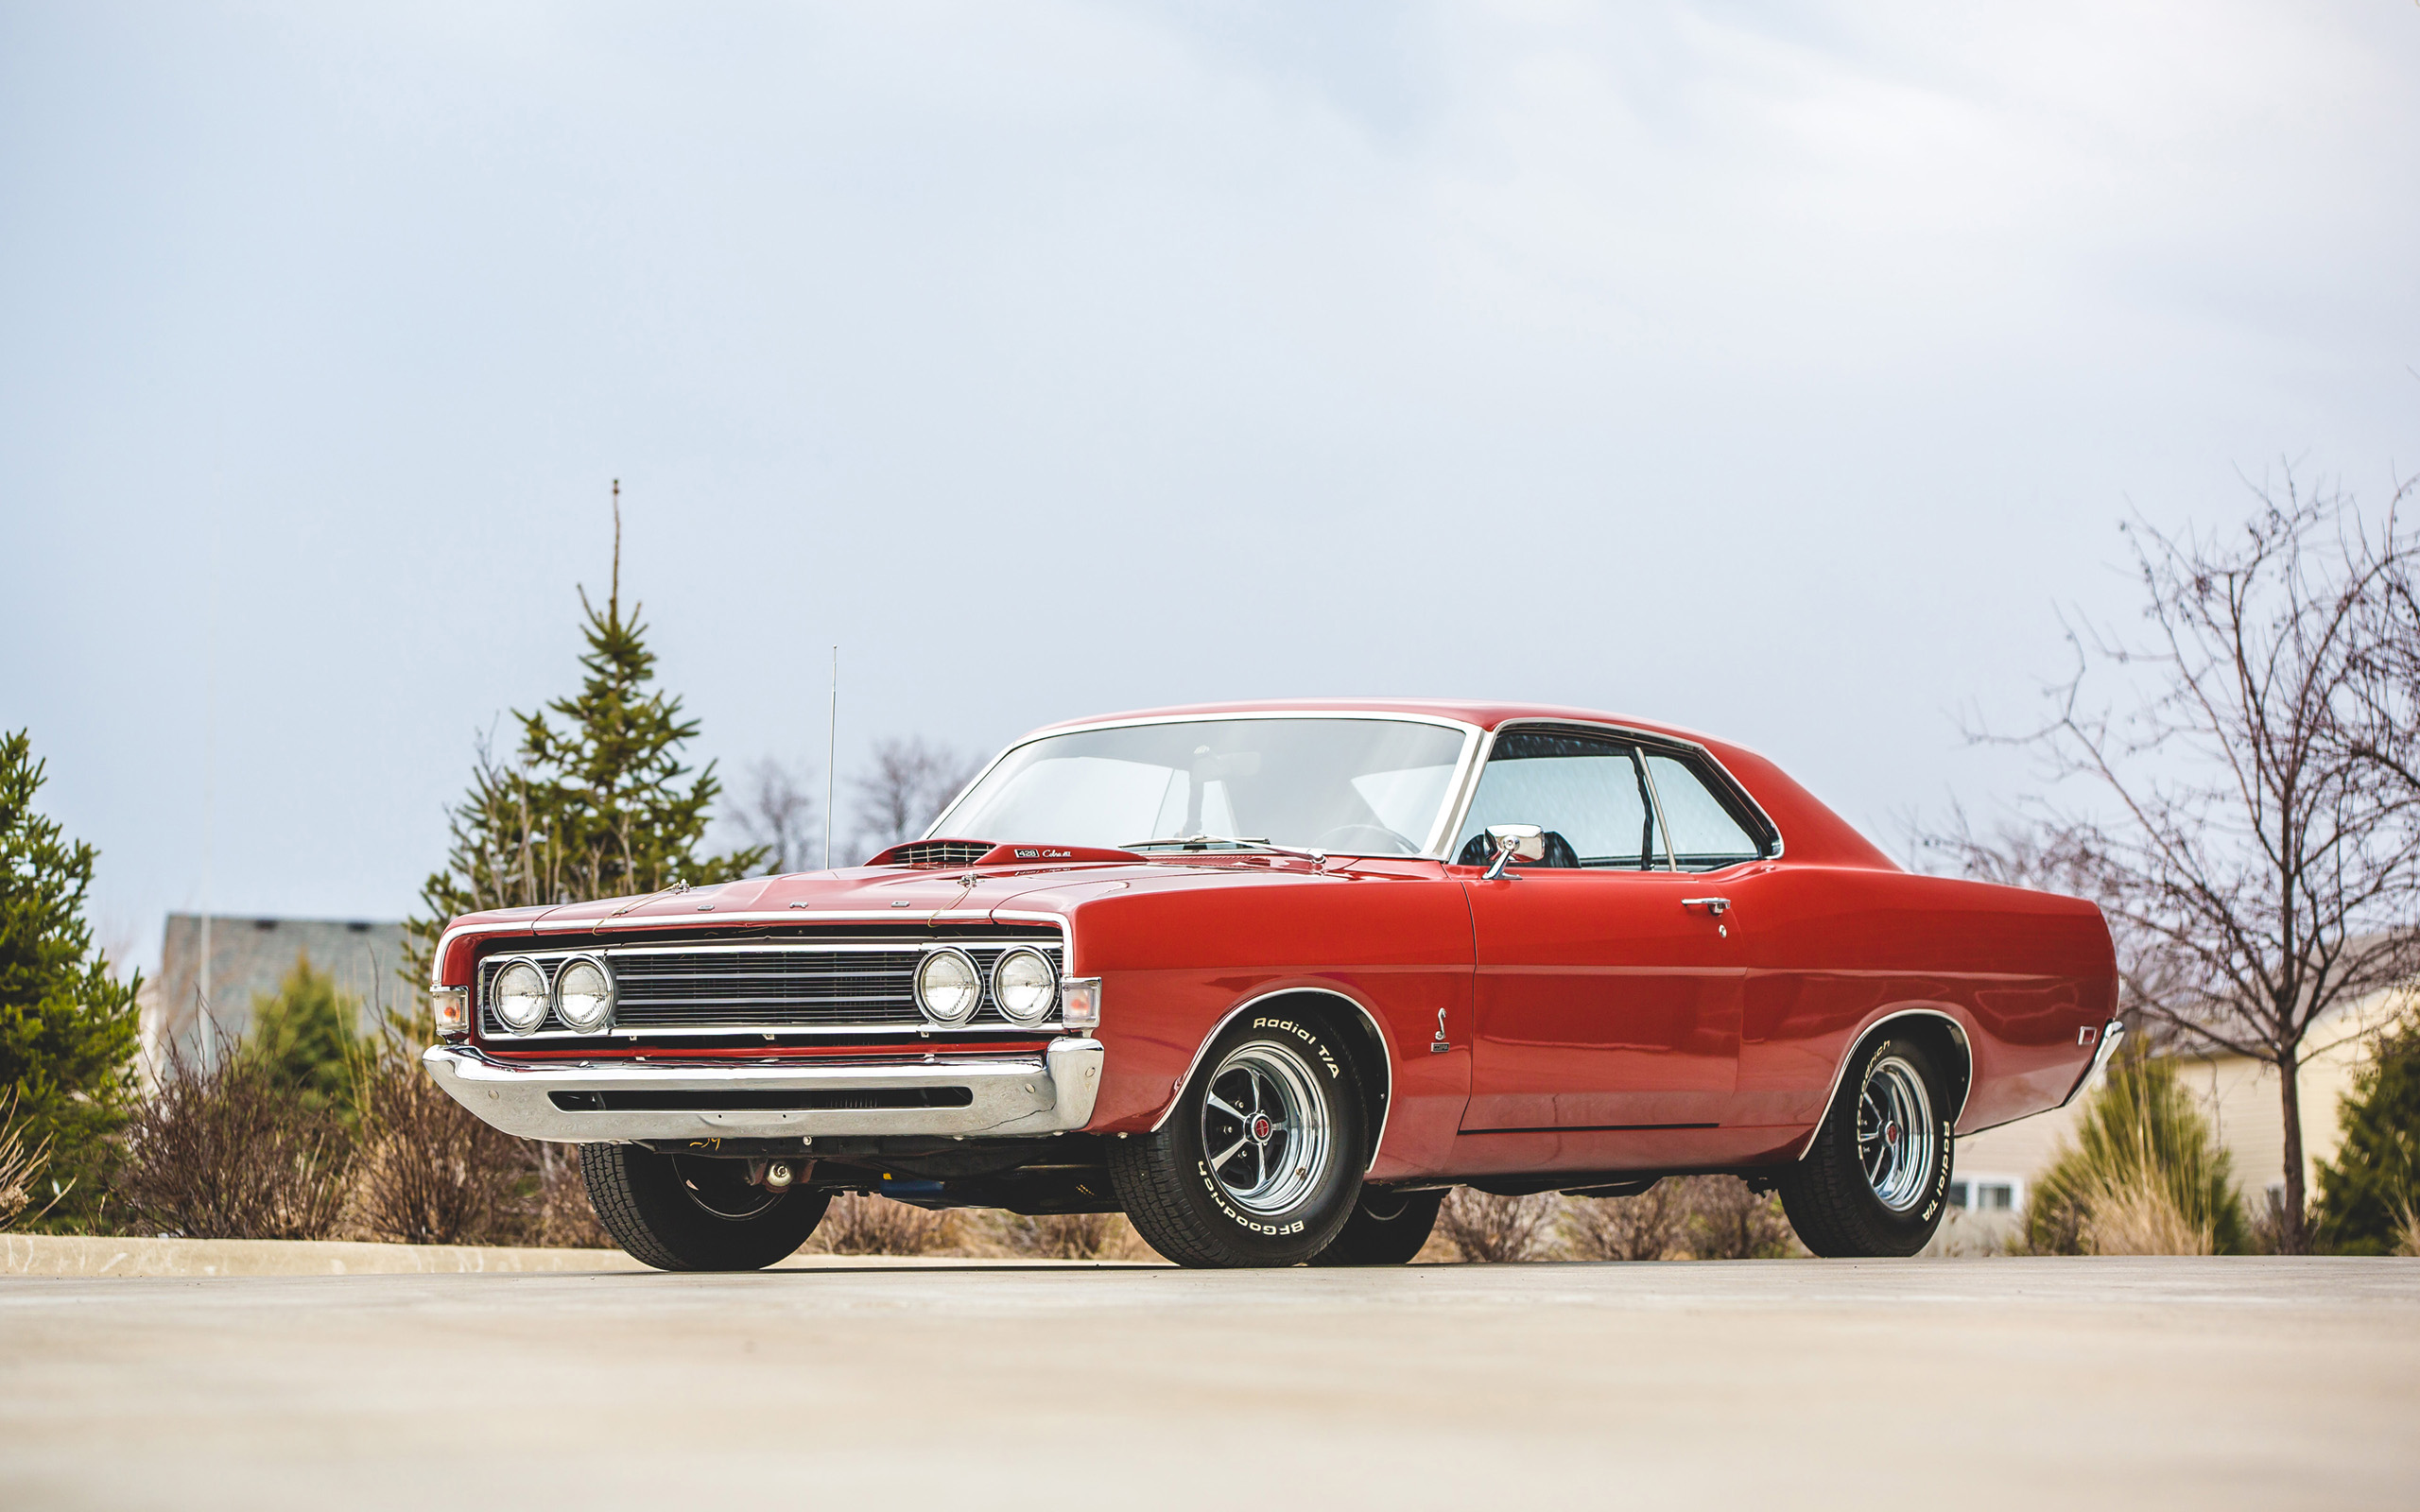 1969 Ford Torino Cobra Indian Fire Red Wallpaper Hd Car Wallpapers Id 6967